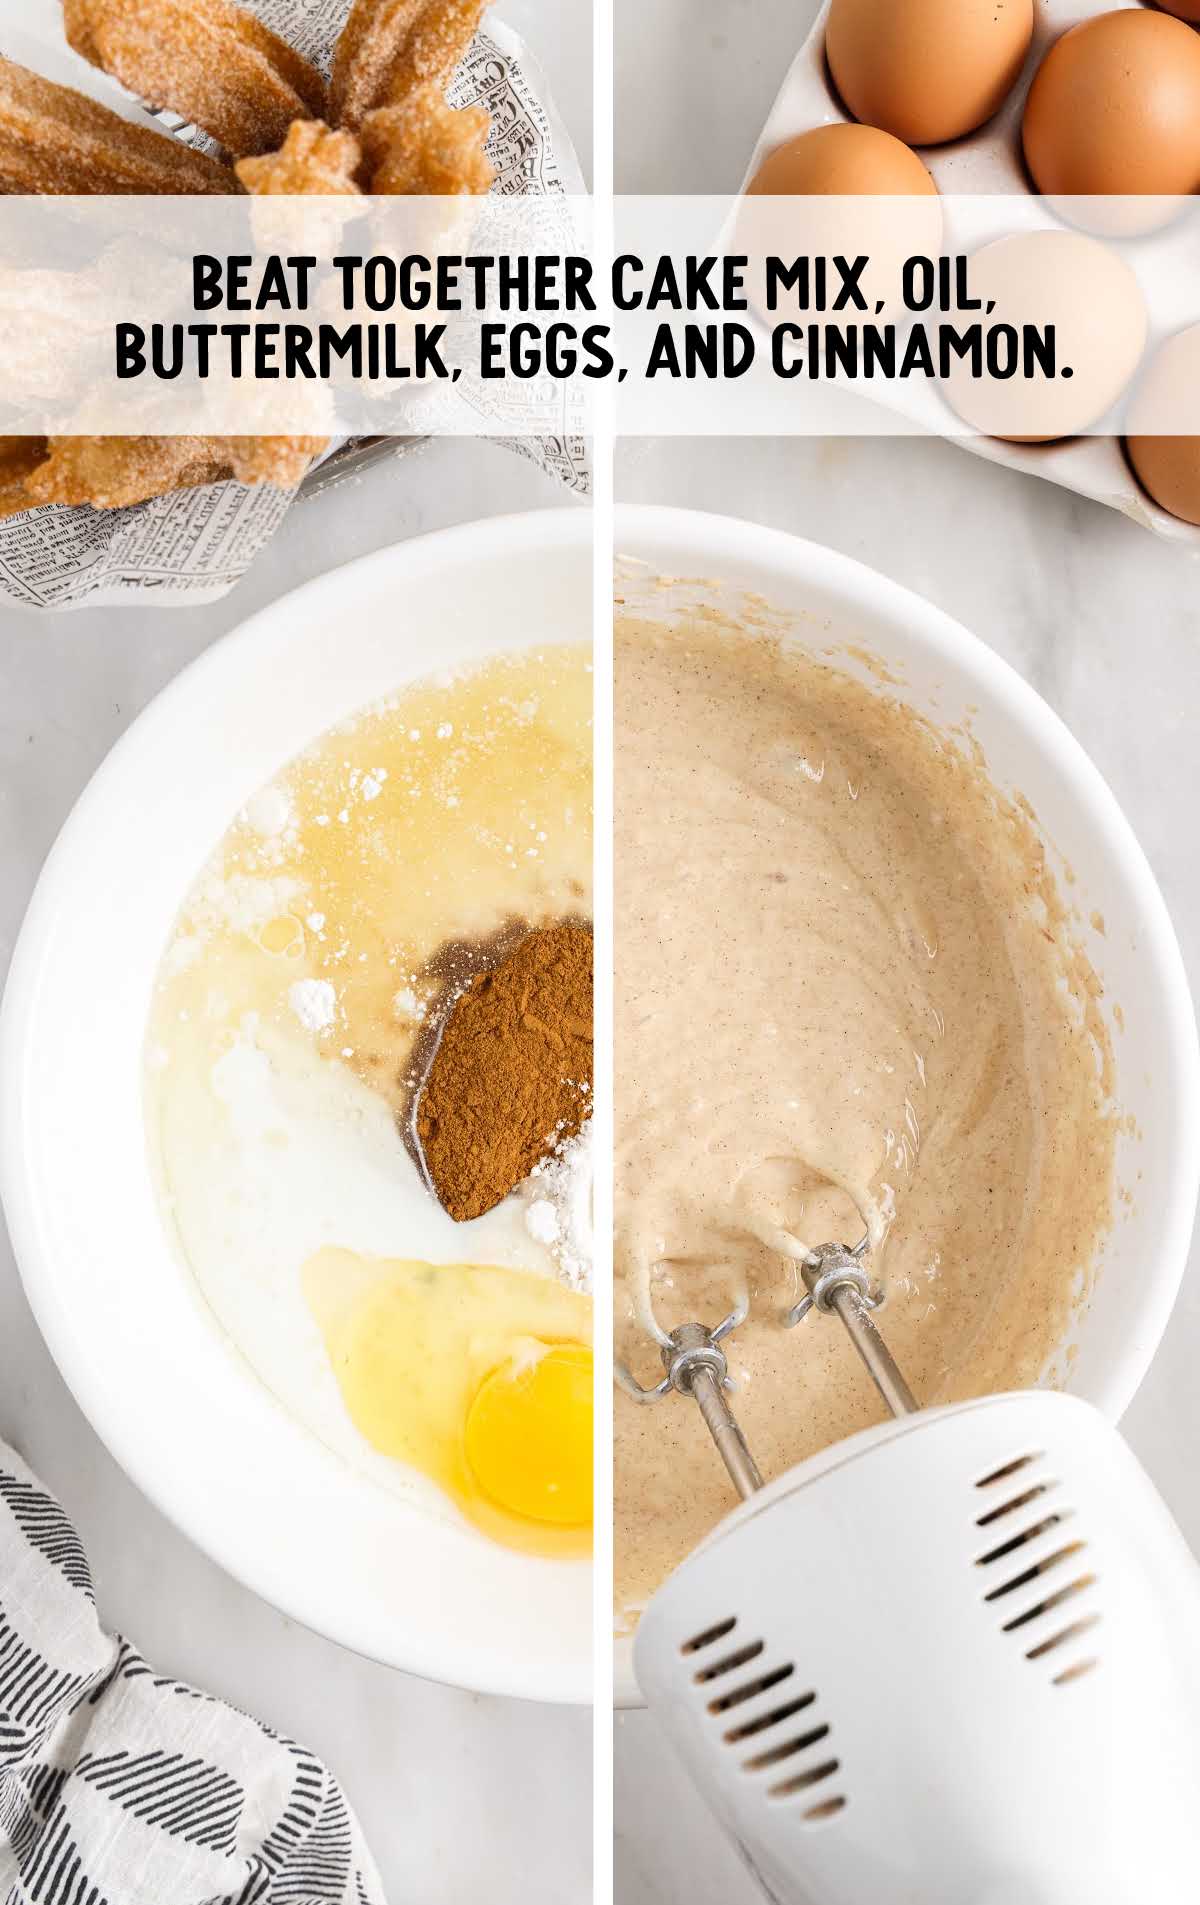 cake mix, oil, buttermilk, eggs and cinnamon blended together